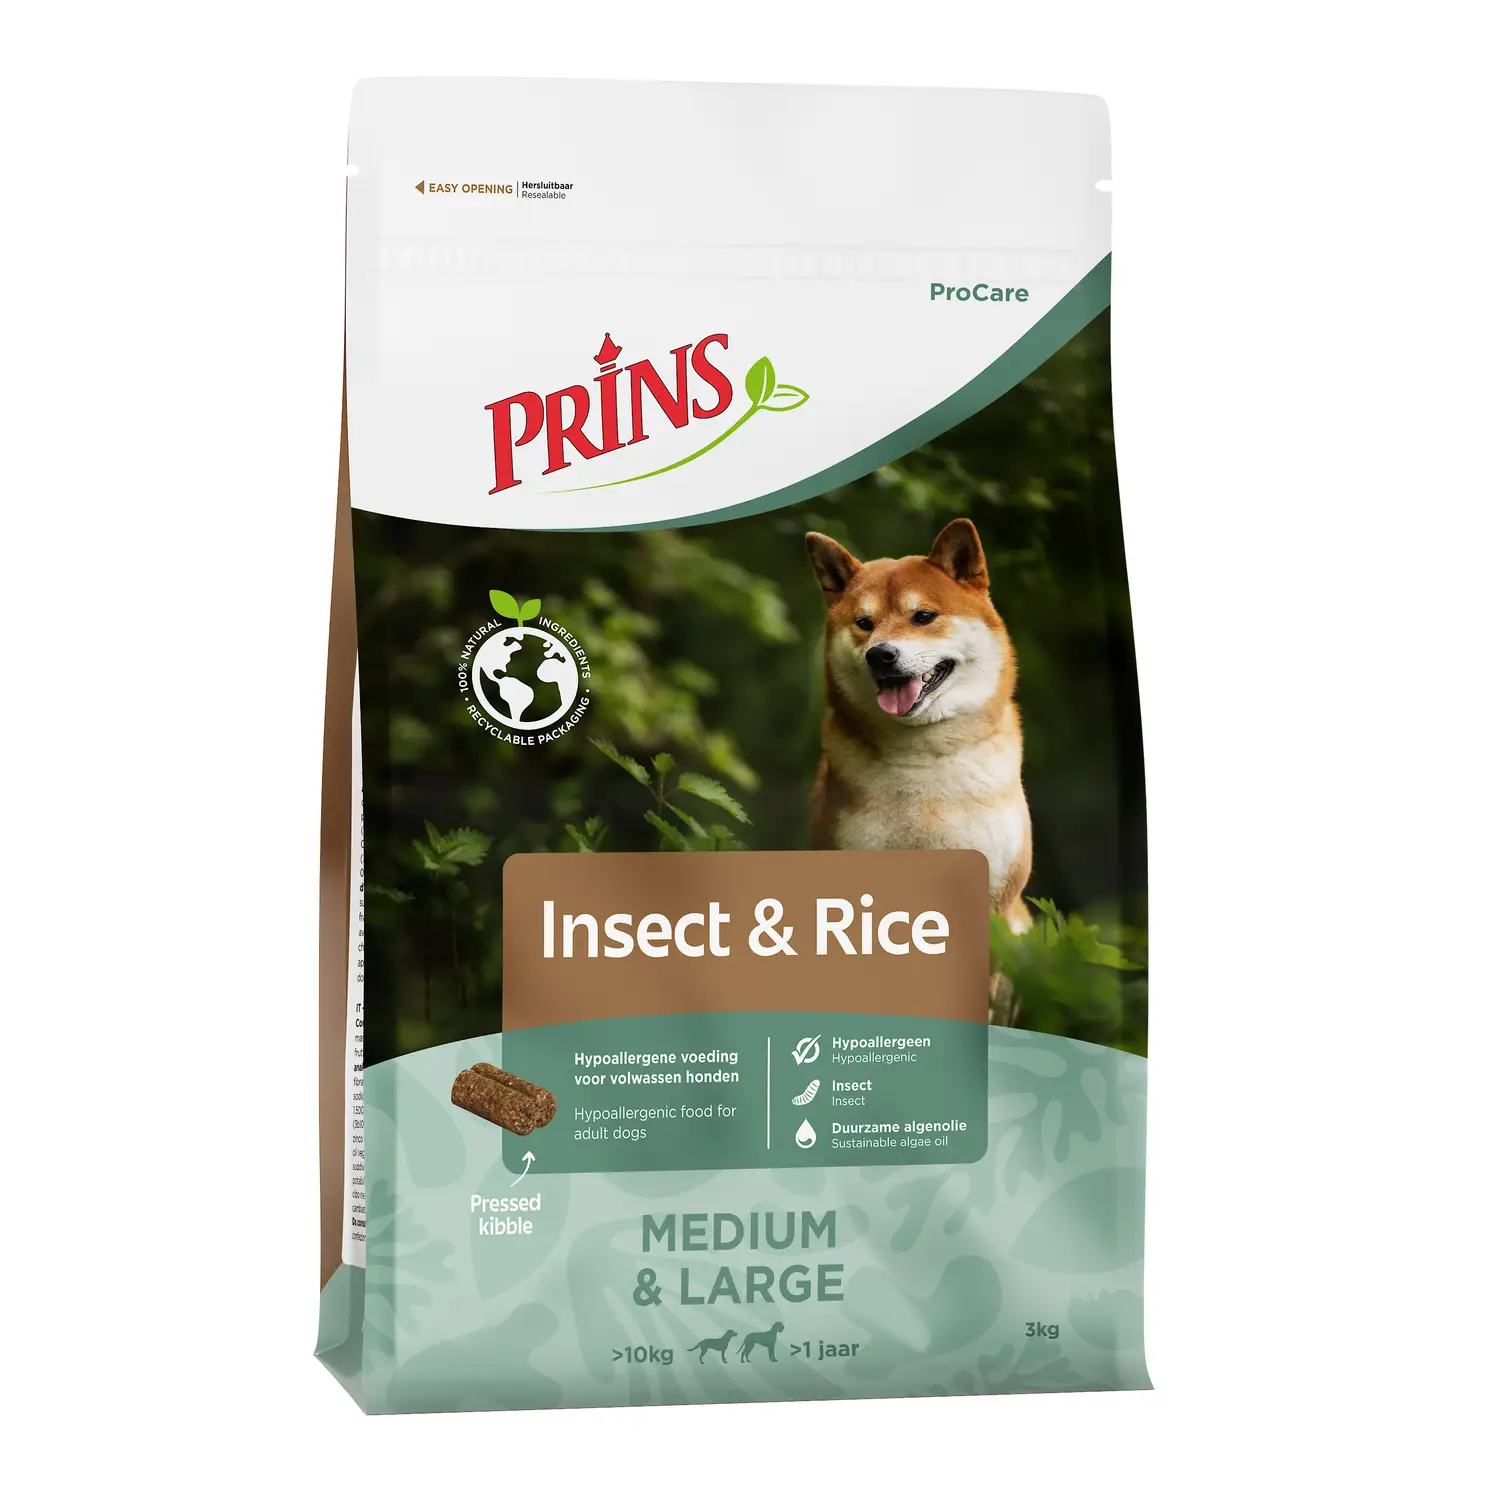 https://media.prinspetfoods.net/products/large/prins-procare-insect-rice.webp